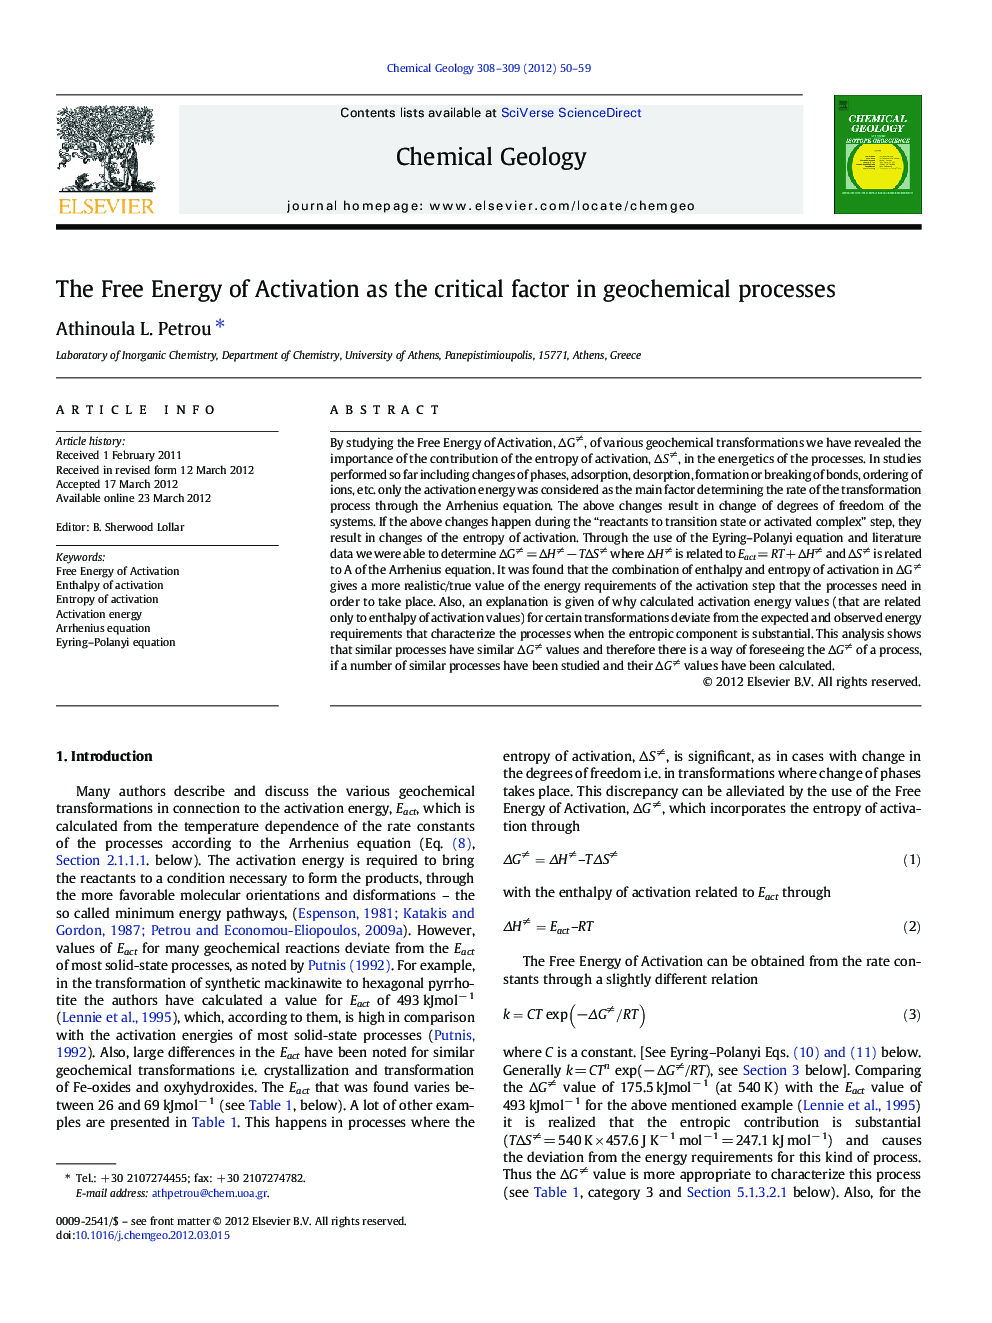 The Free Energy of Activation as the critical factor in geochemical processes